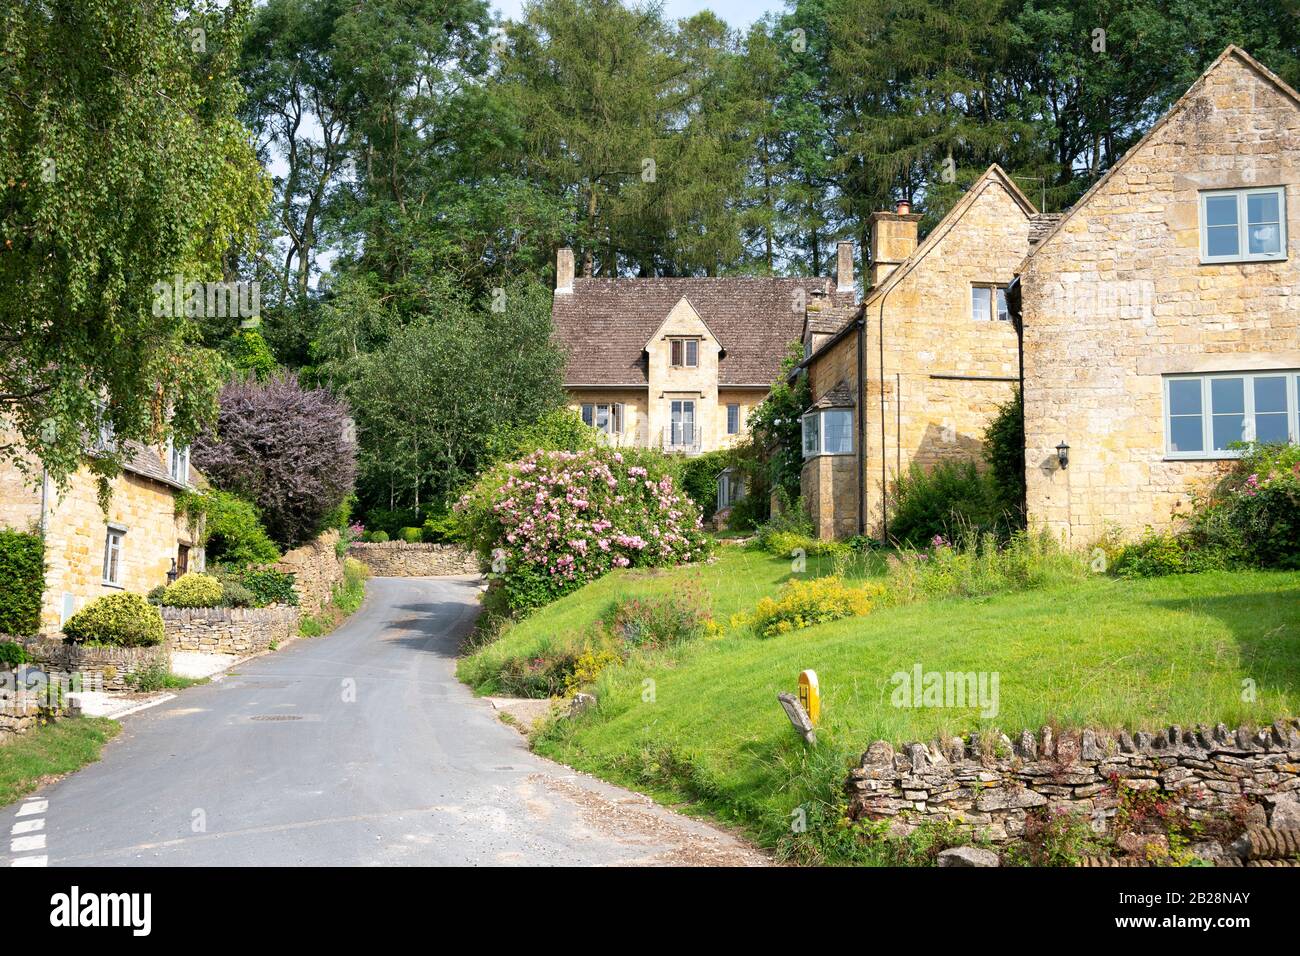 Houses in Cotswold village, Snowshill, Gloucestershire, Cotswolds, England Stock Photo